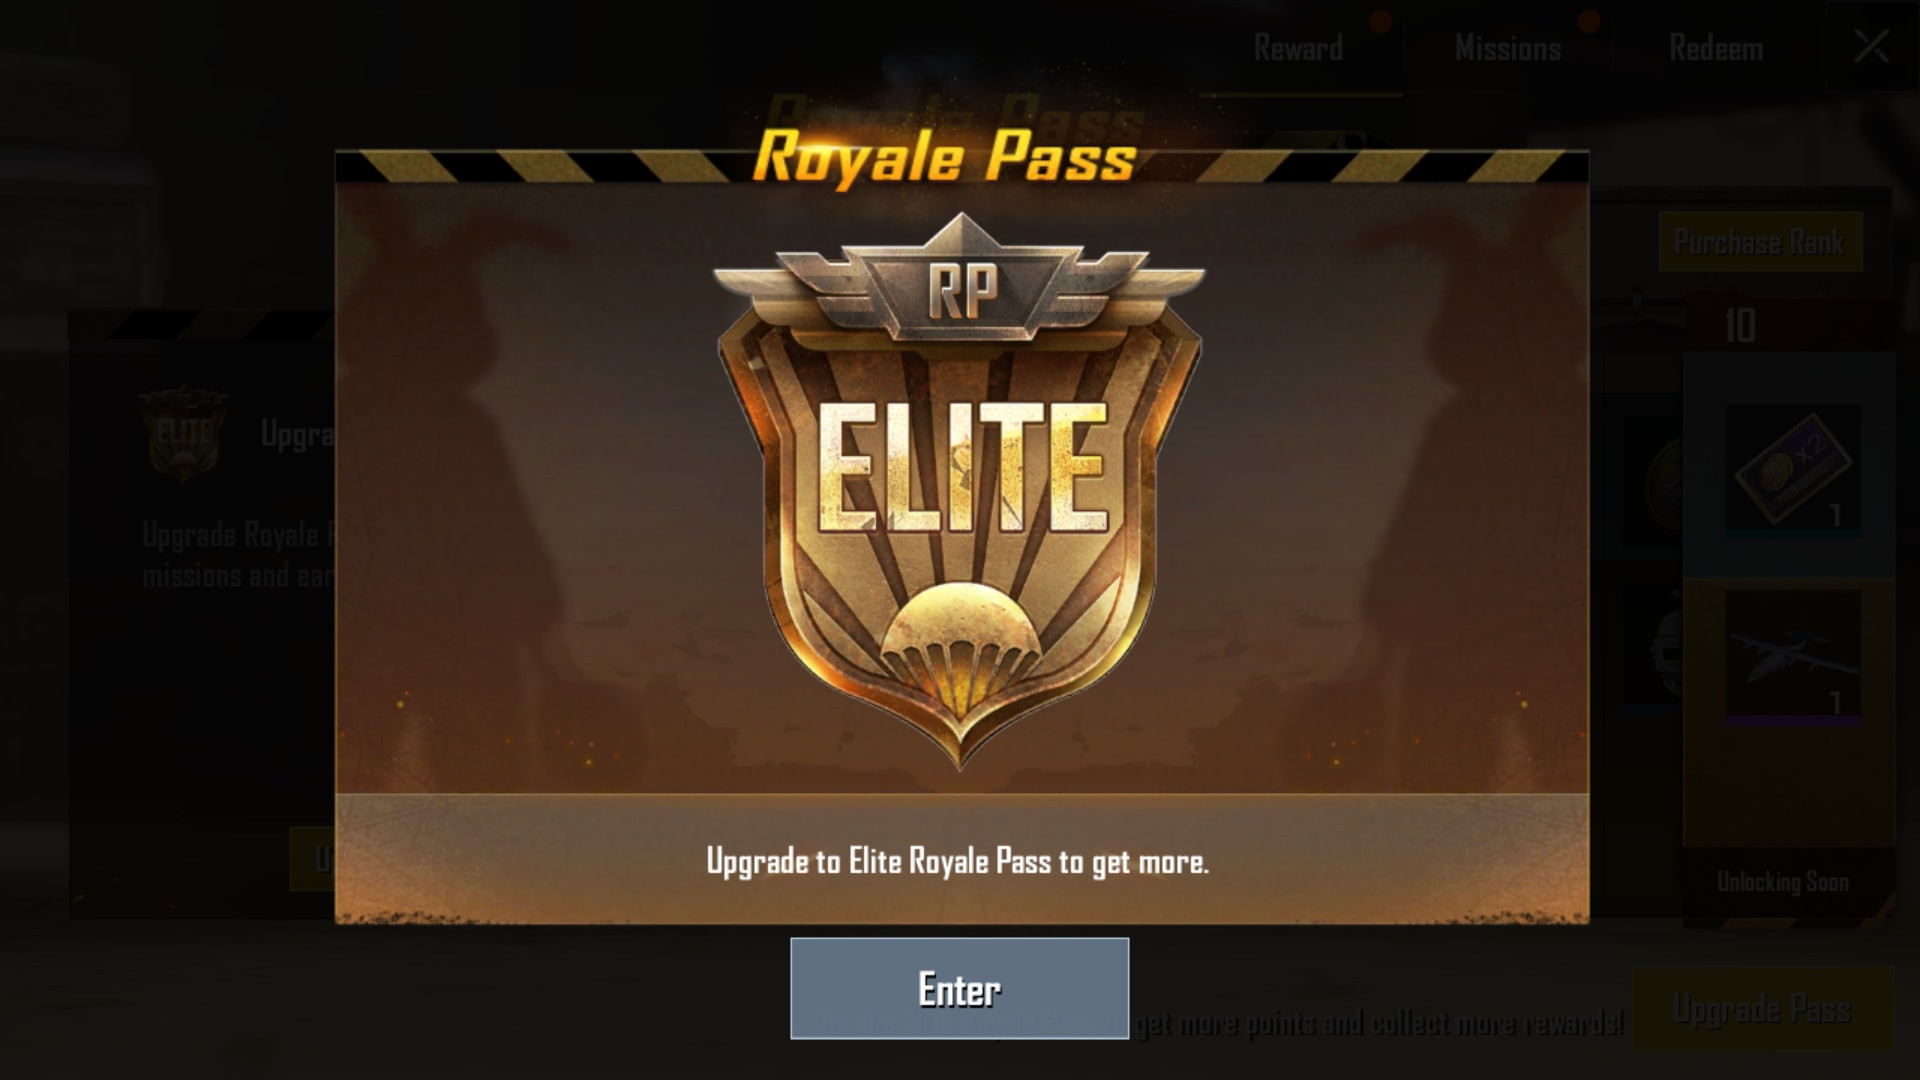 Elite Pass Royale Season 1 in PUBG MOBILE - zilliongamer your game guide